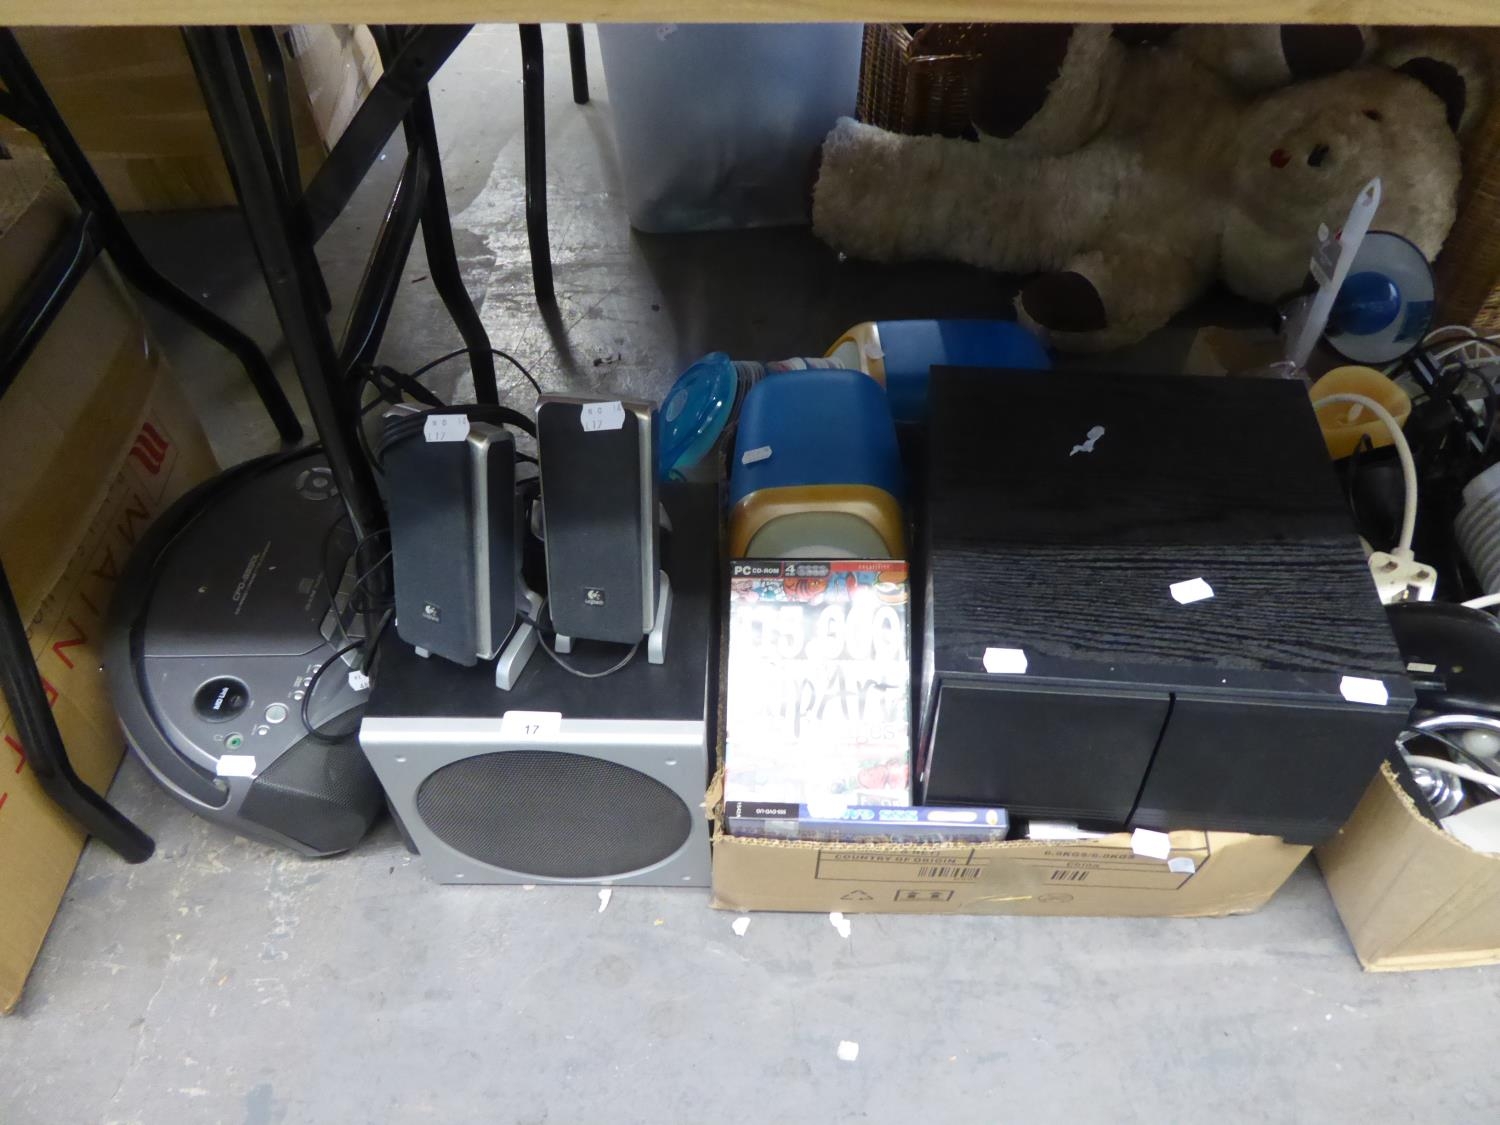 A LOGITECH 23 SUBWOOFER AND 2 SPEAKERS, A SONY PORTABLE CD/RADIO PLAYER AND A SELECTION OF DVD'S AND